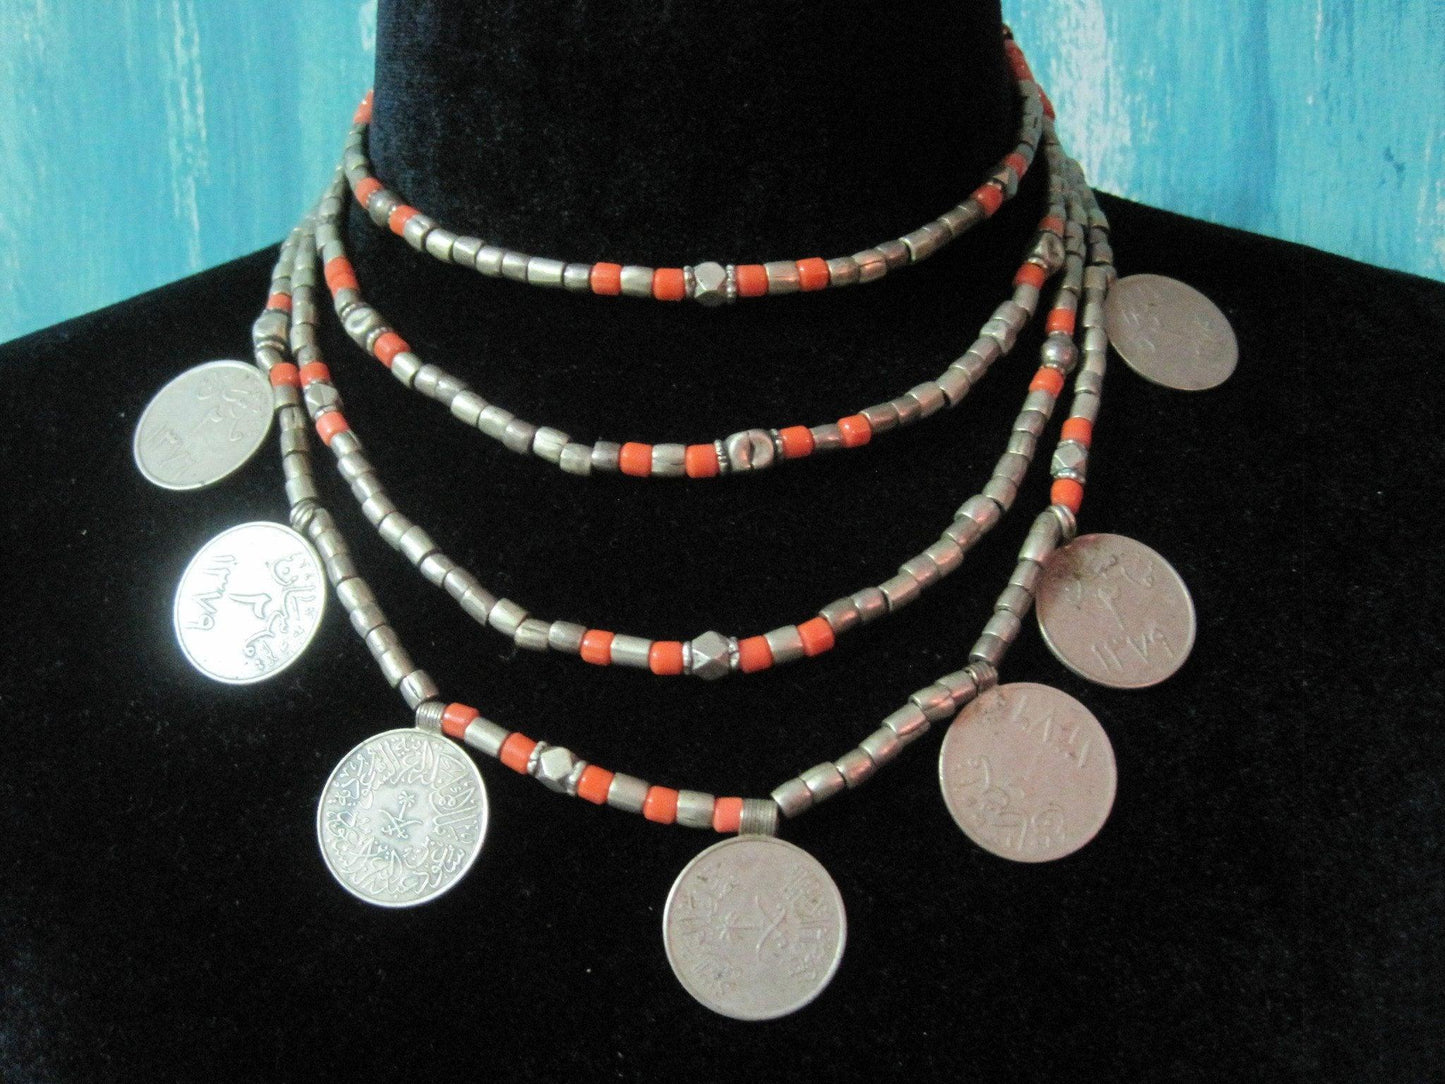 Vintage Saudi Arabian Necklace With Coins, Silver, Metal and Coral Glass Beads - Anteeka